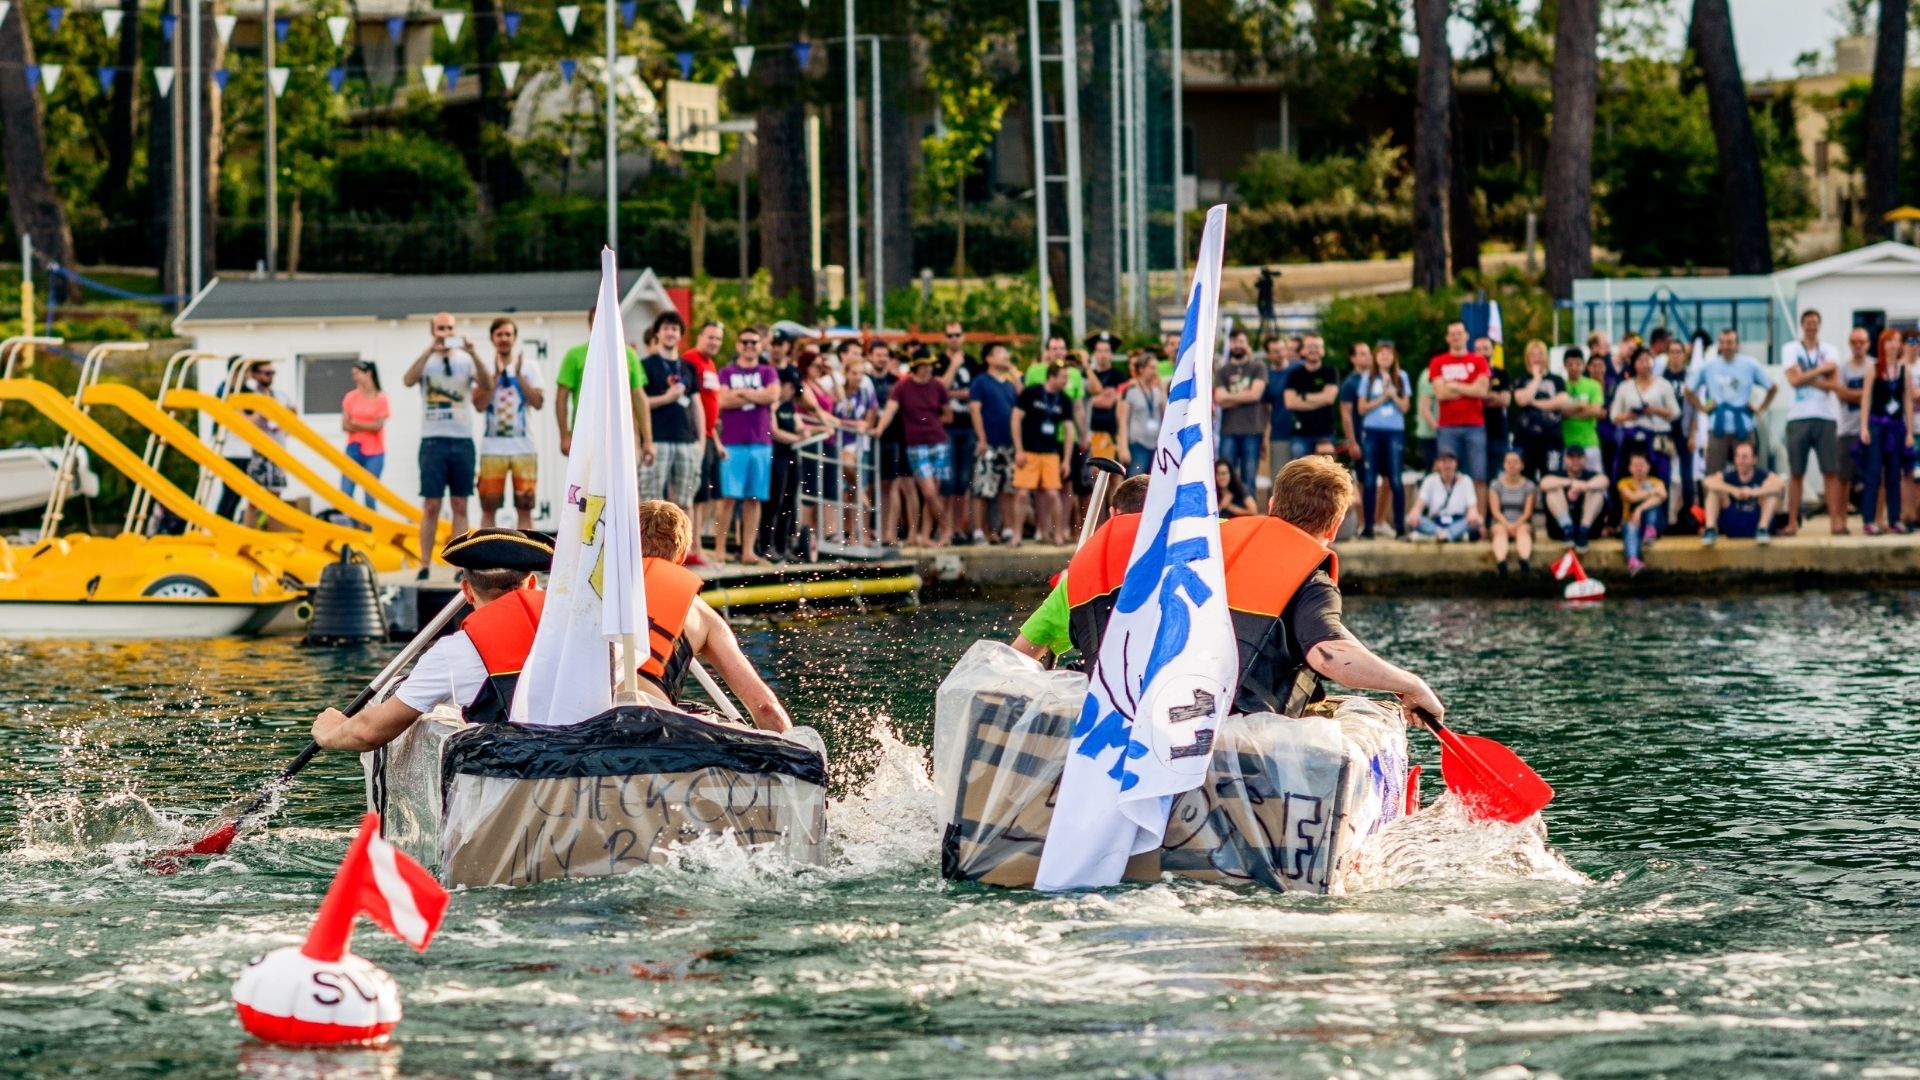 Participants racing in their boats